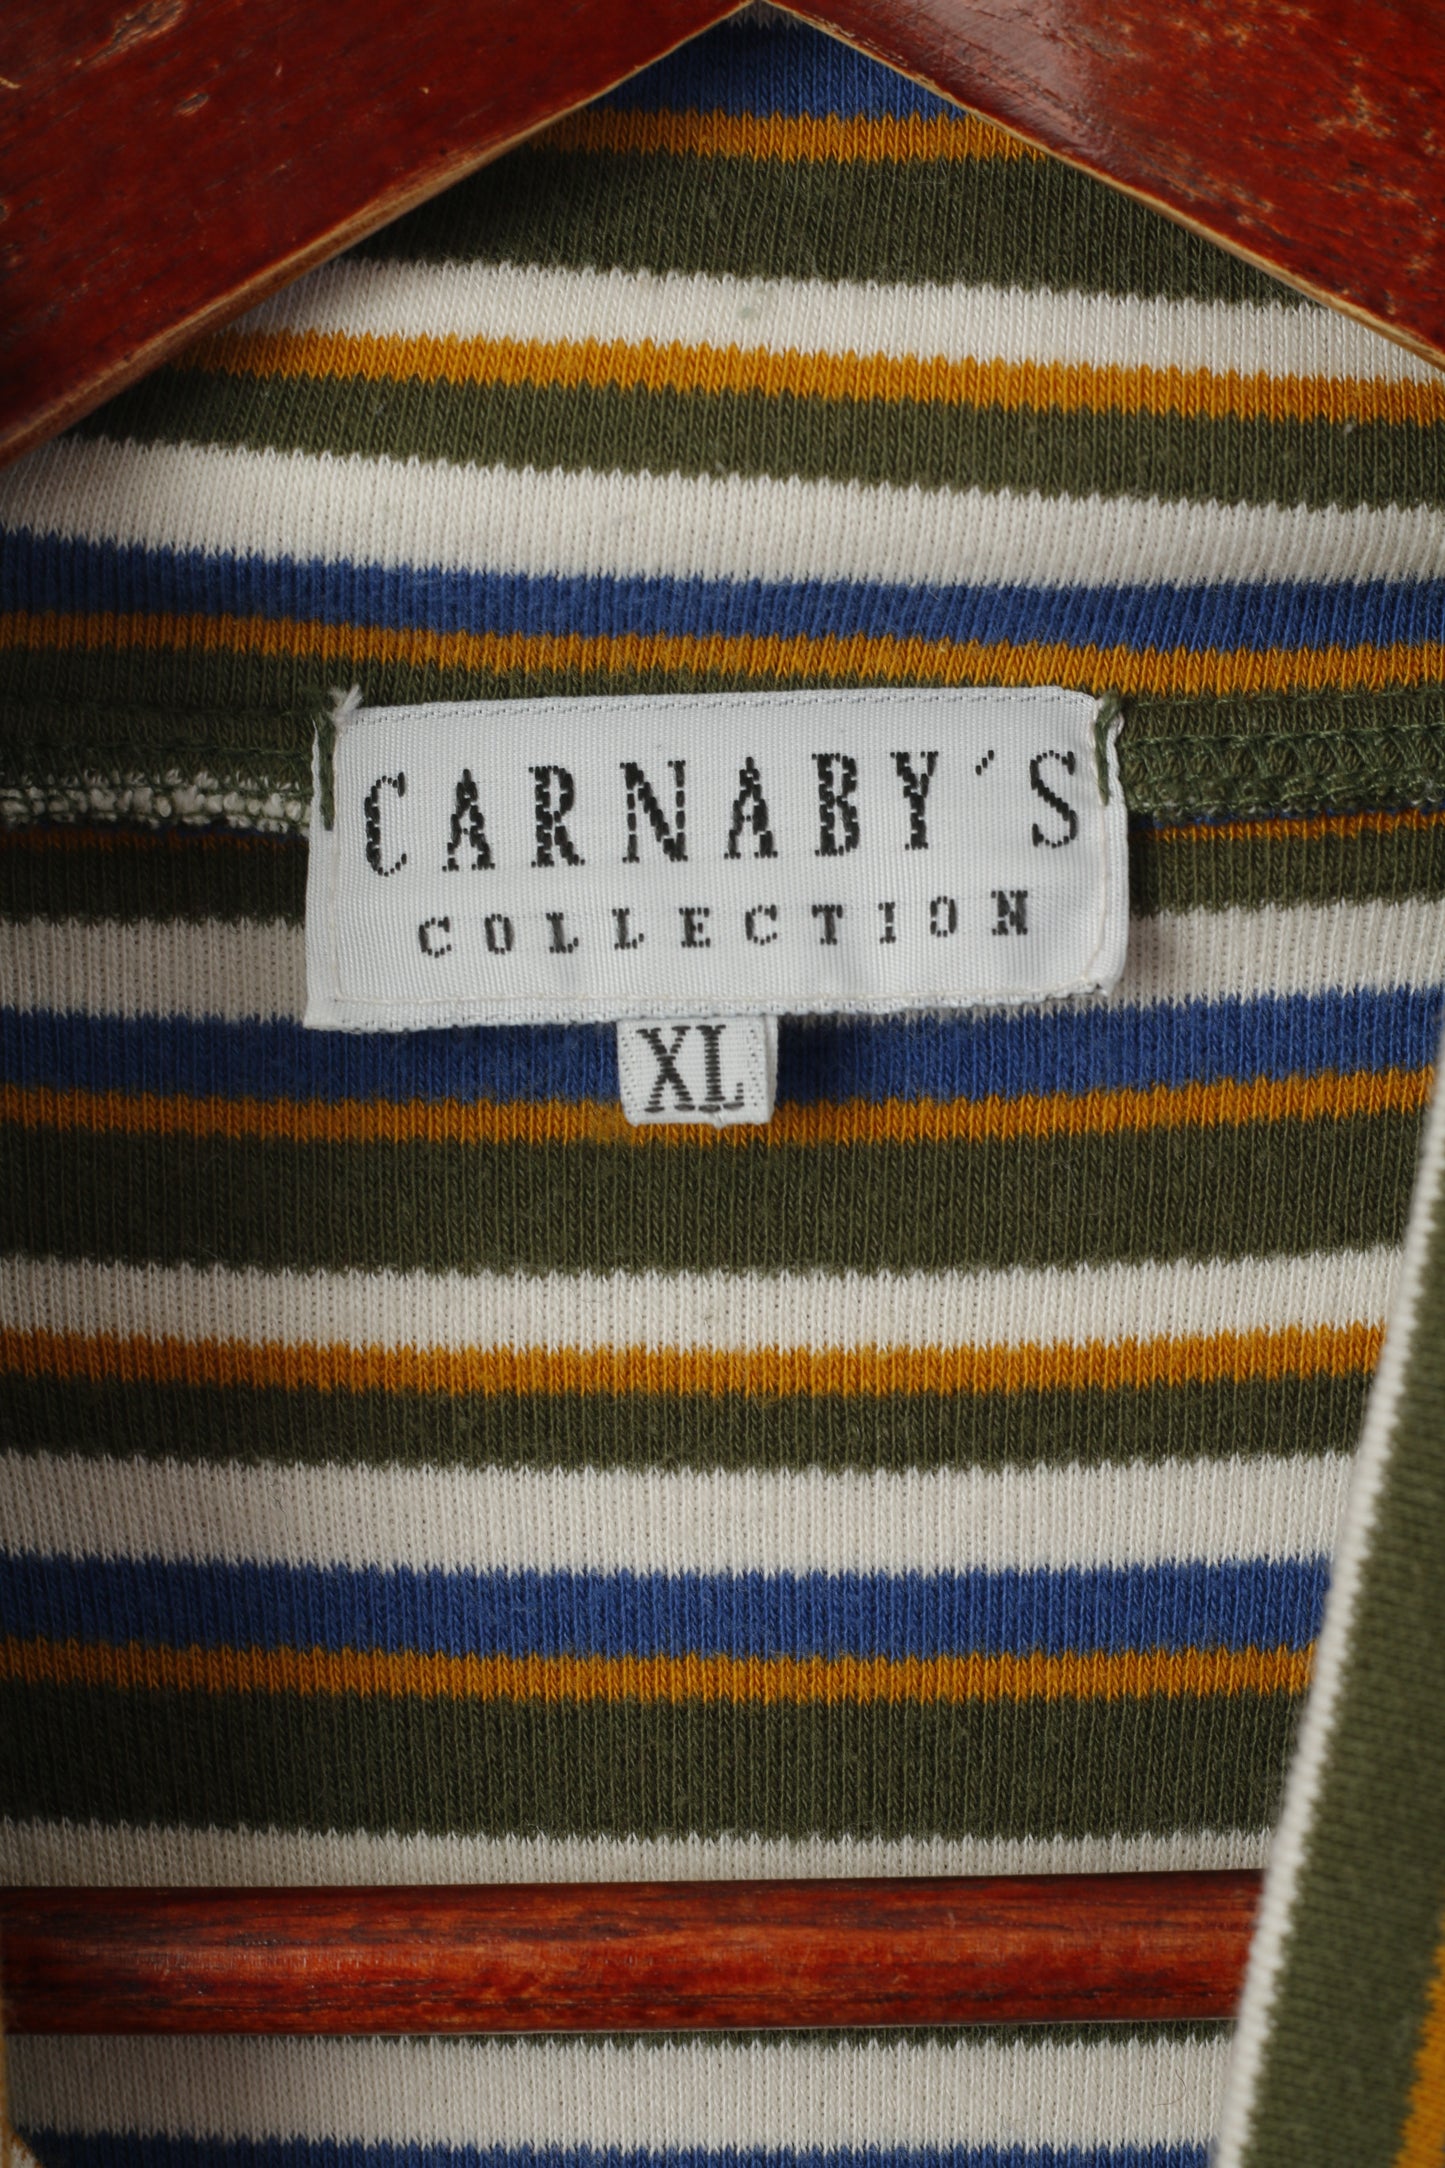 Carnaby's Collection Men XL Shirt Multi Striped Cotton Turtle Neck Stretch Long Sleeve Top